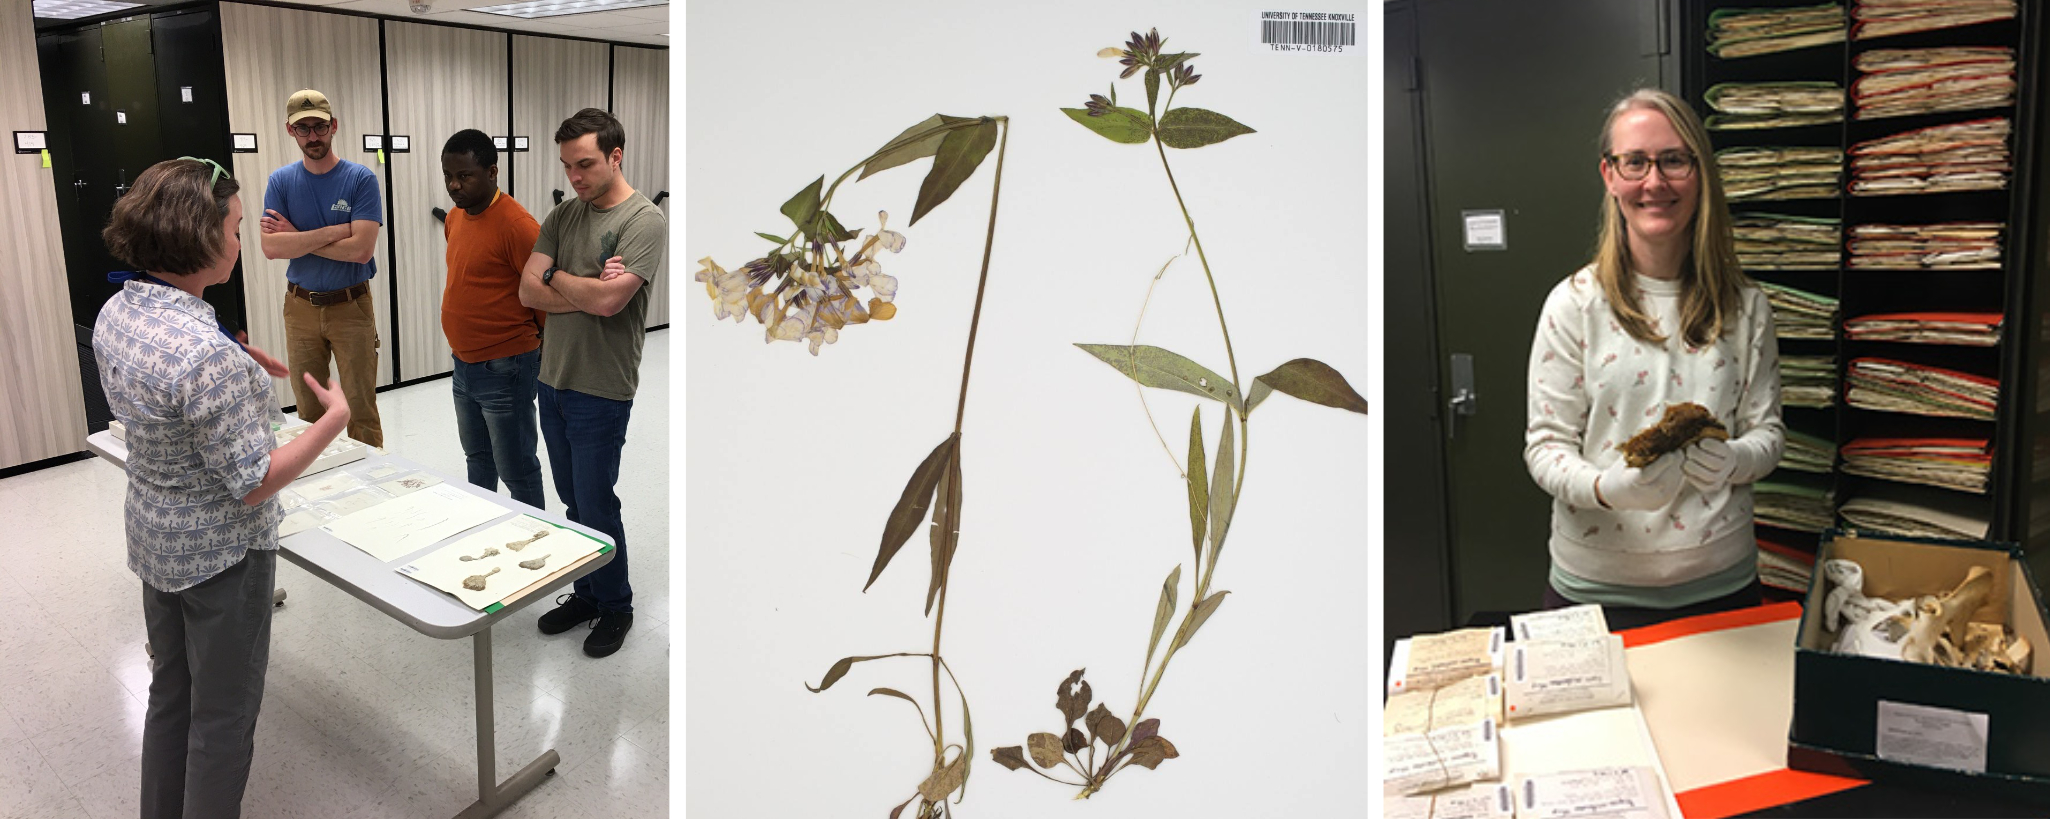 Triptych of photos showing folks working with plants and records at the Herbarium